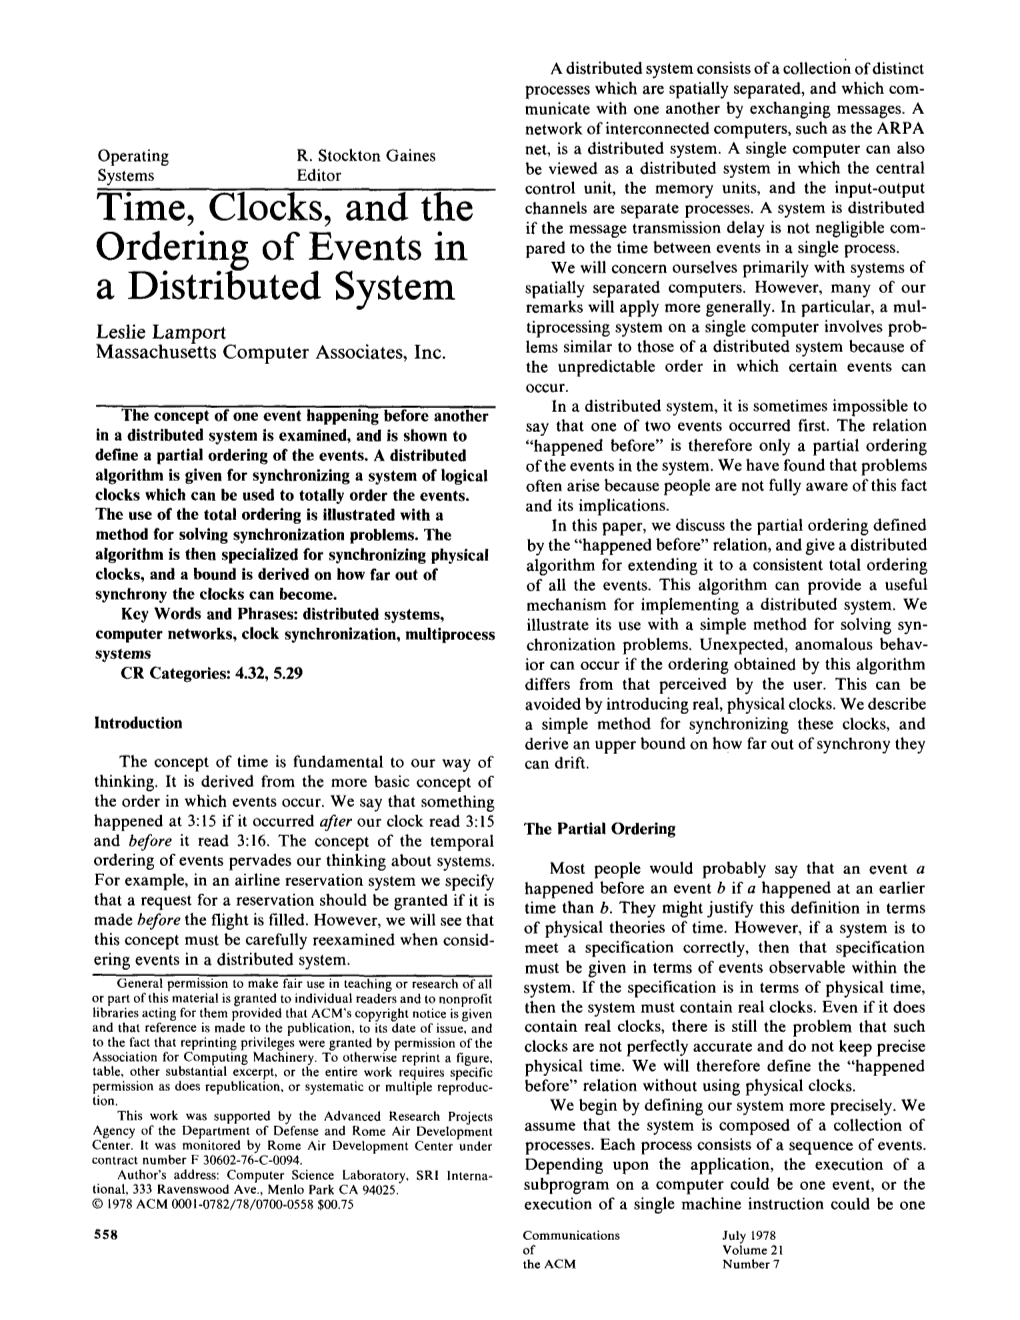 Time, Clocks, and the Ordering of Events in a Distributed System